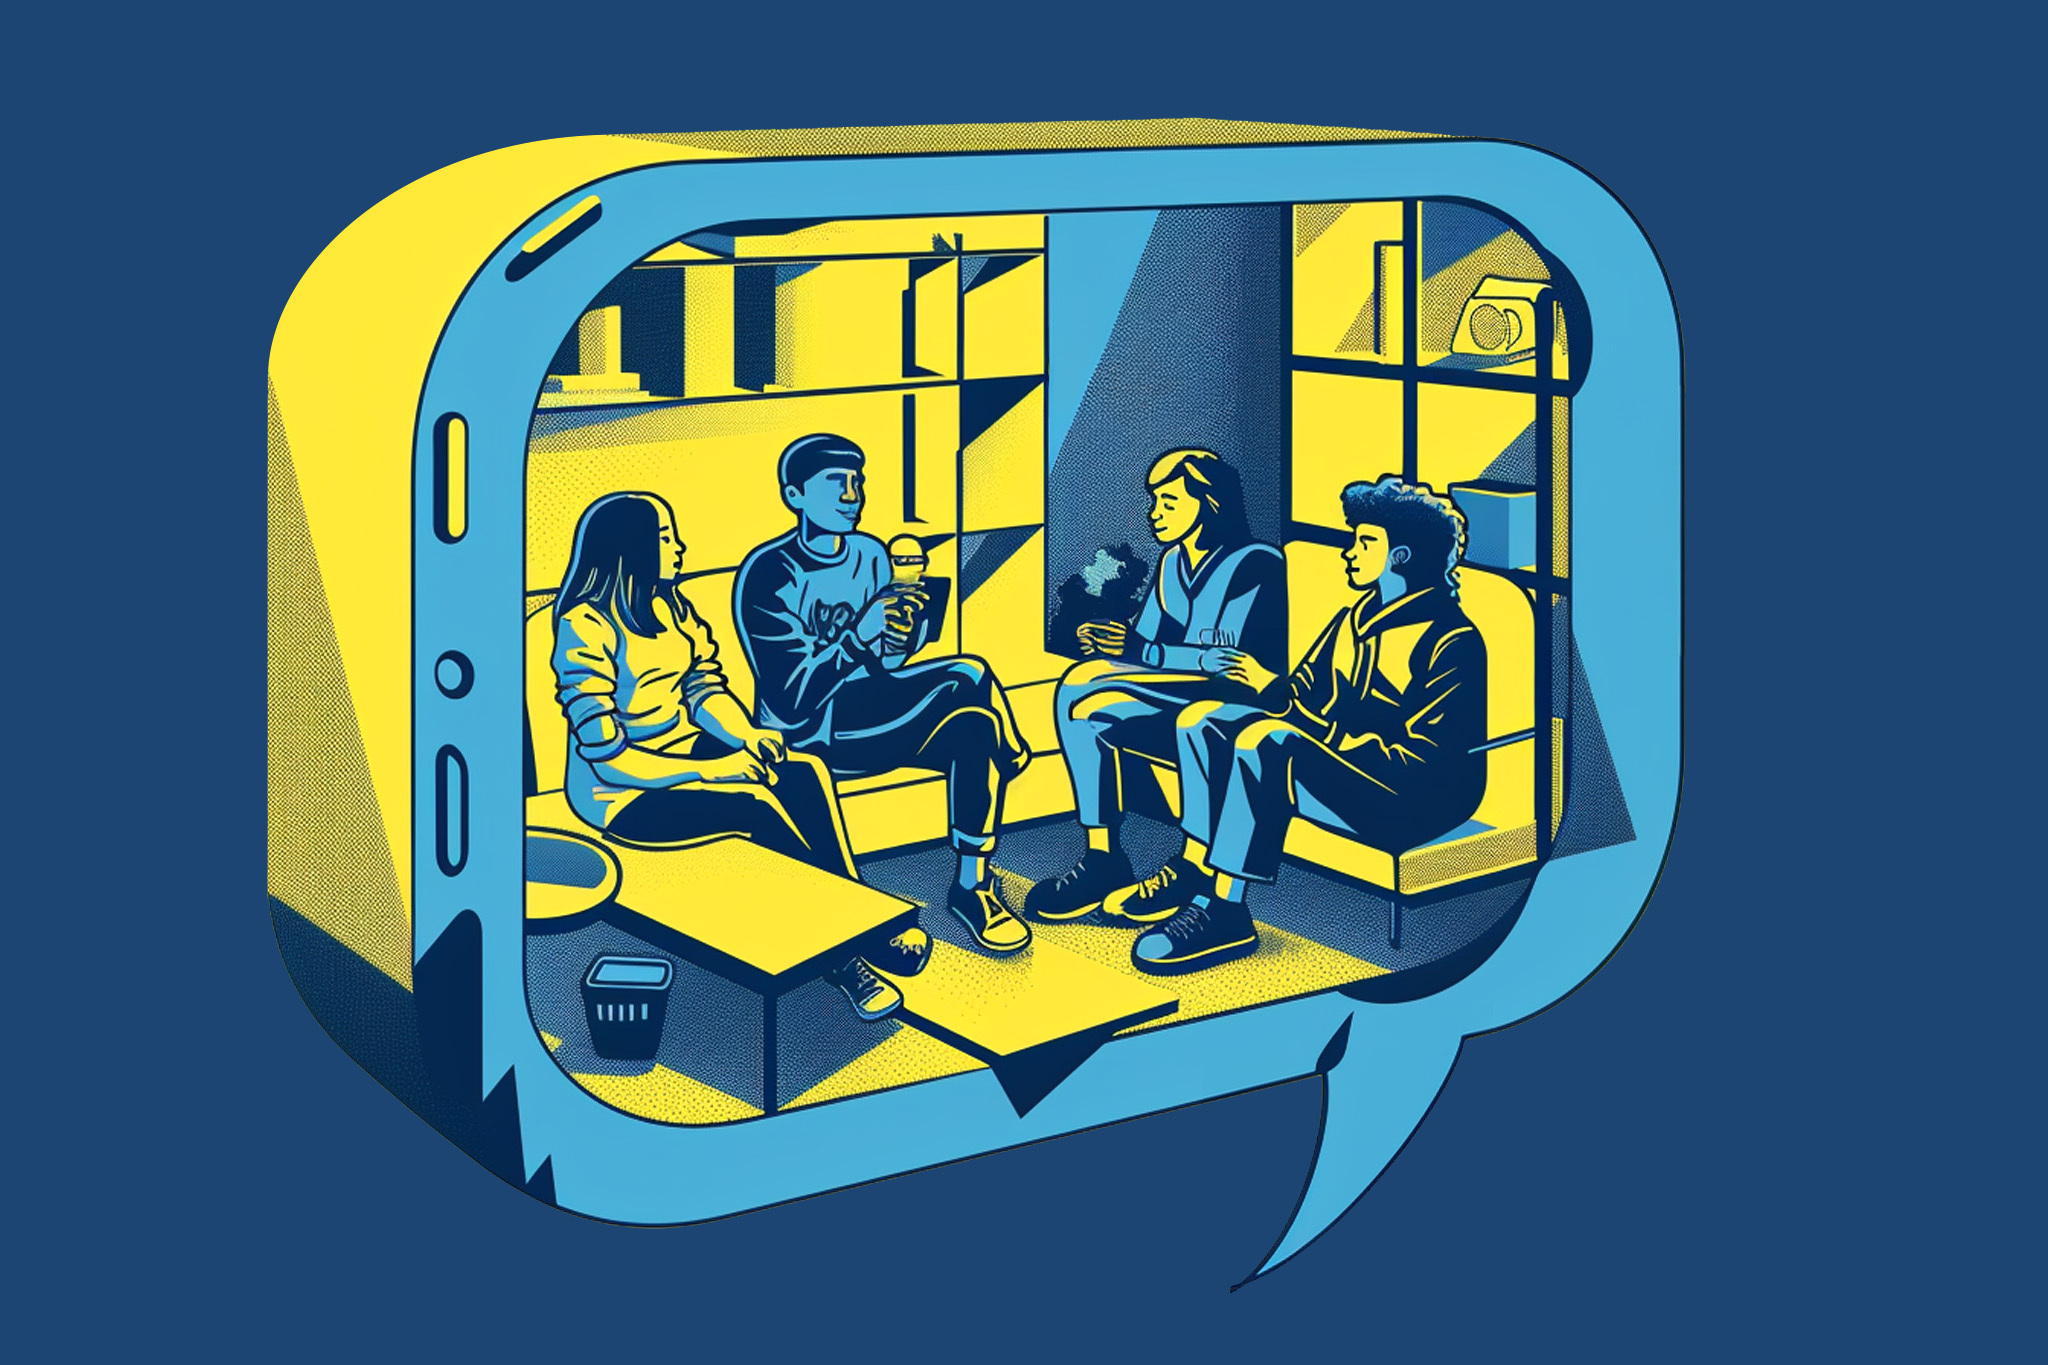 An illustration of four people chatting in a room, viewed through a smartphone-like frame, in a two-tone color scheme.